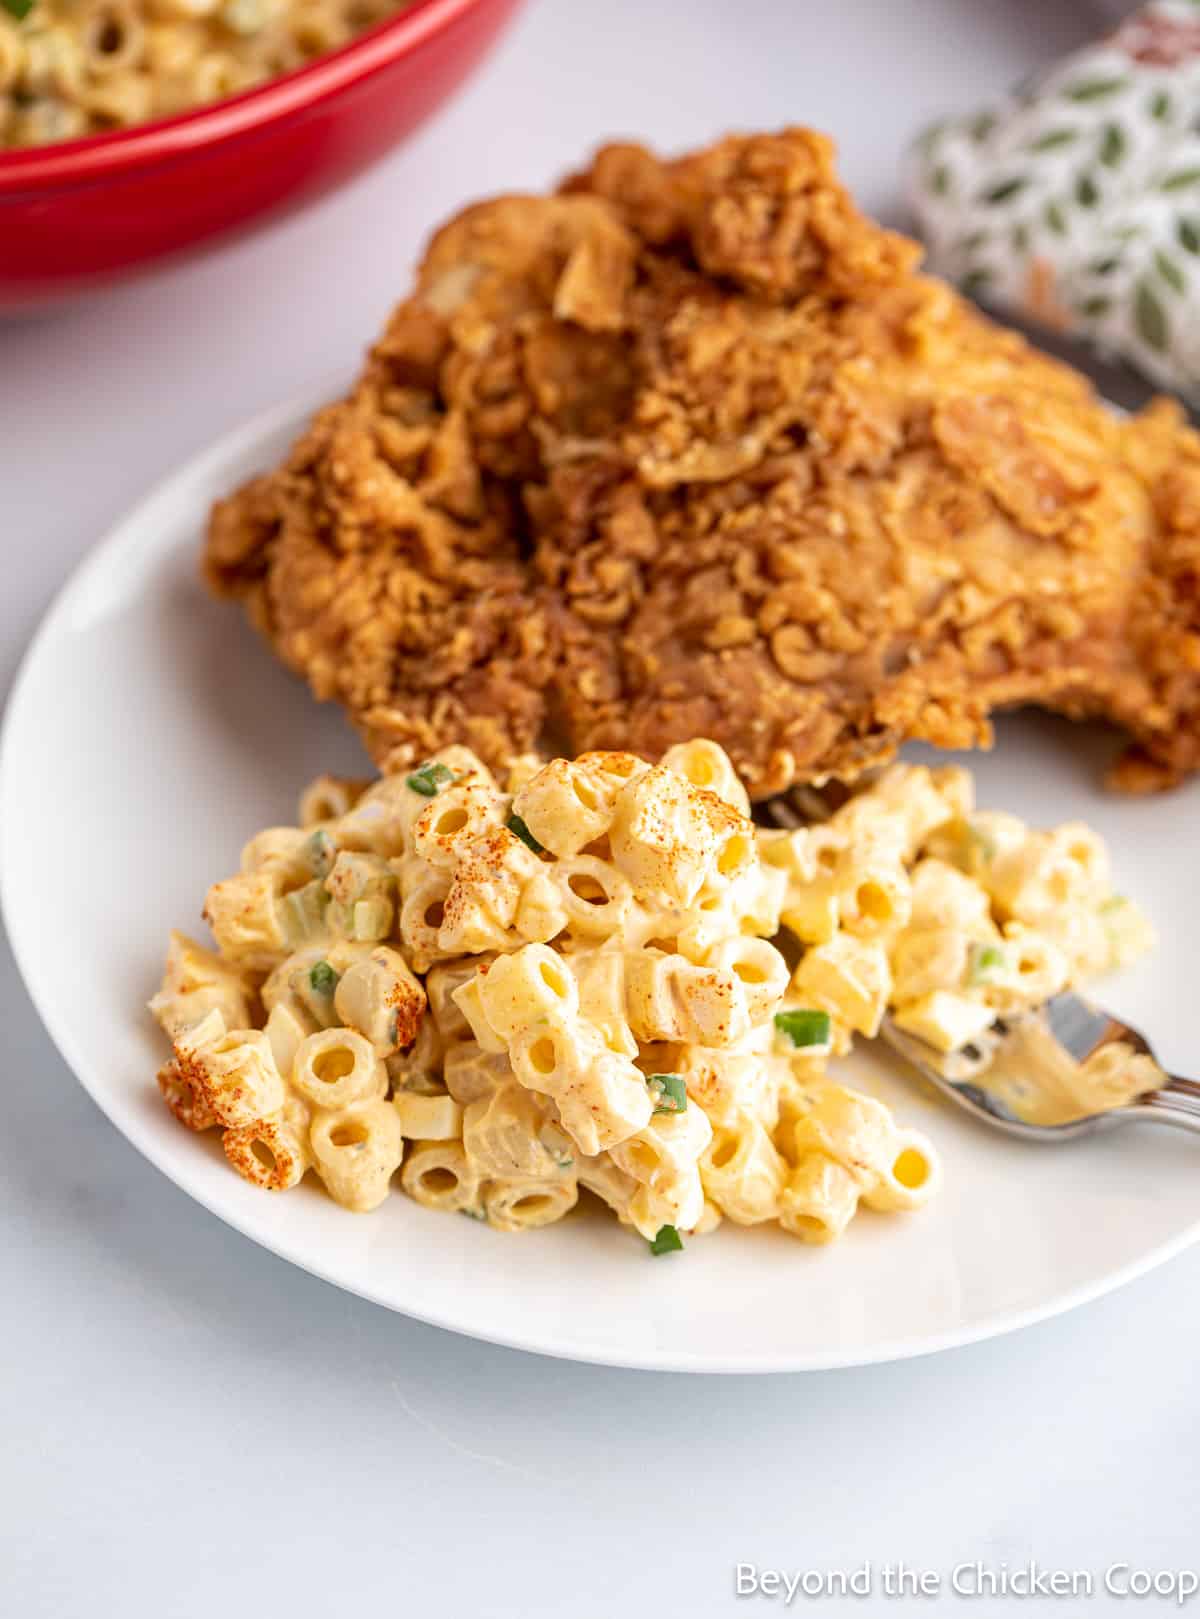 A plate with fried chicken and a pasta salad. 